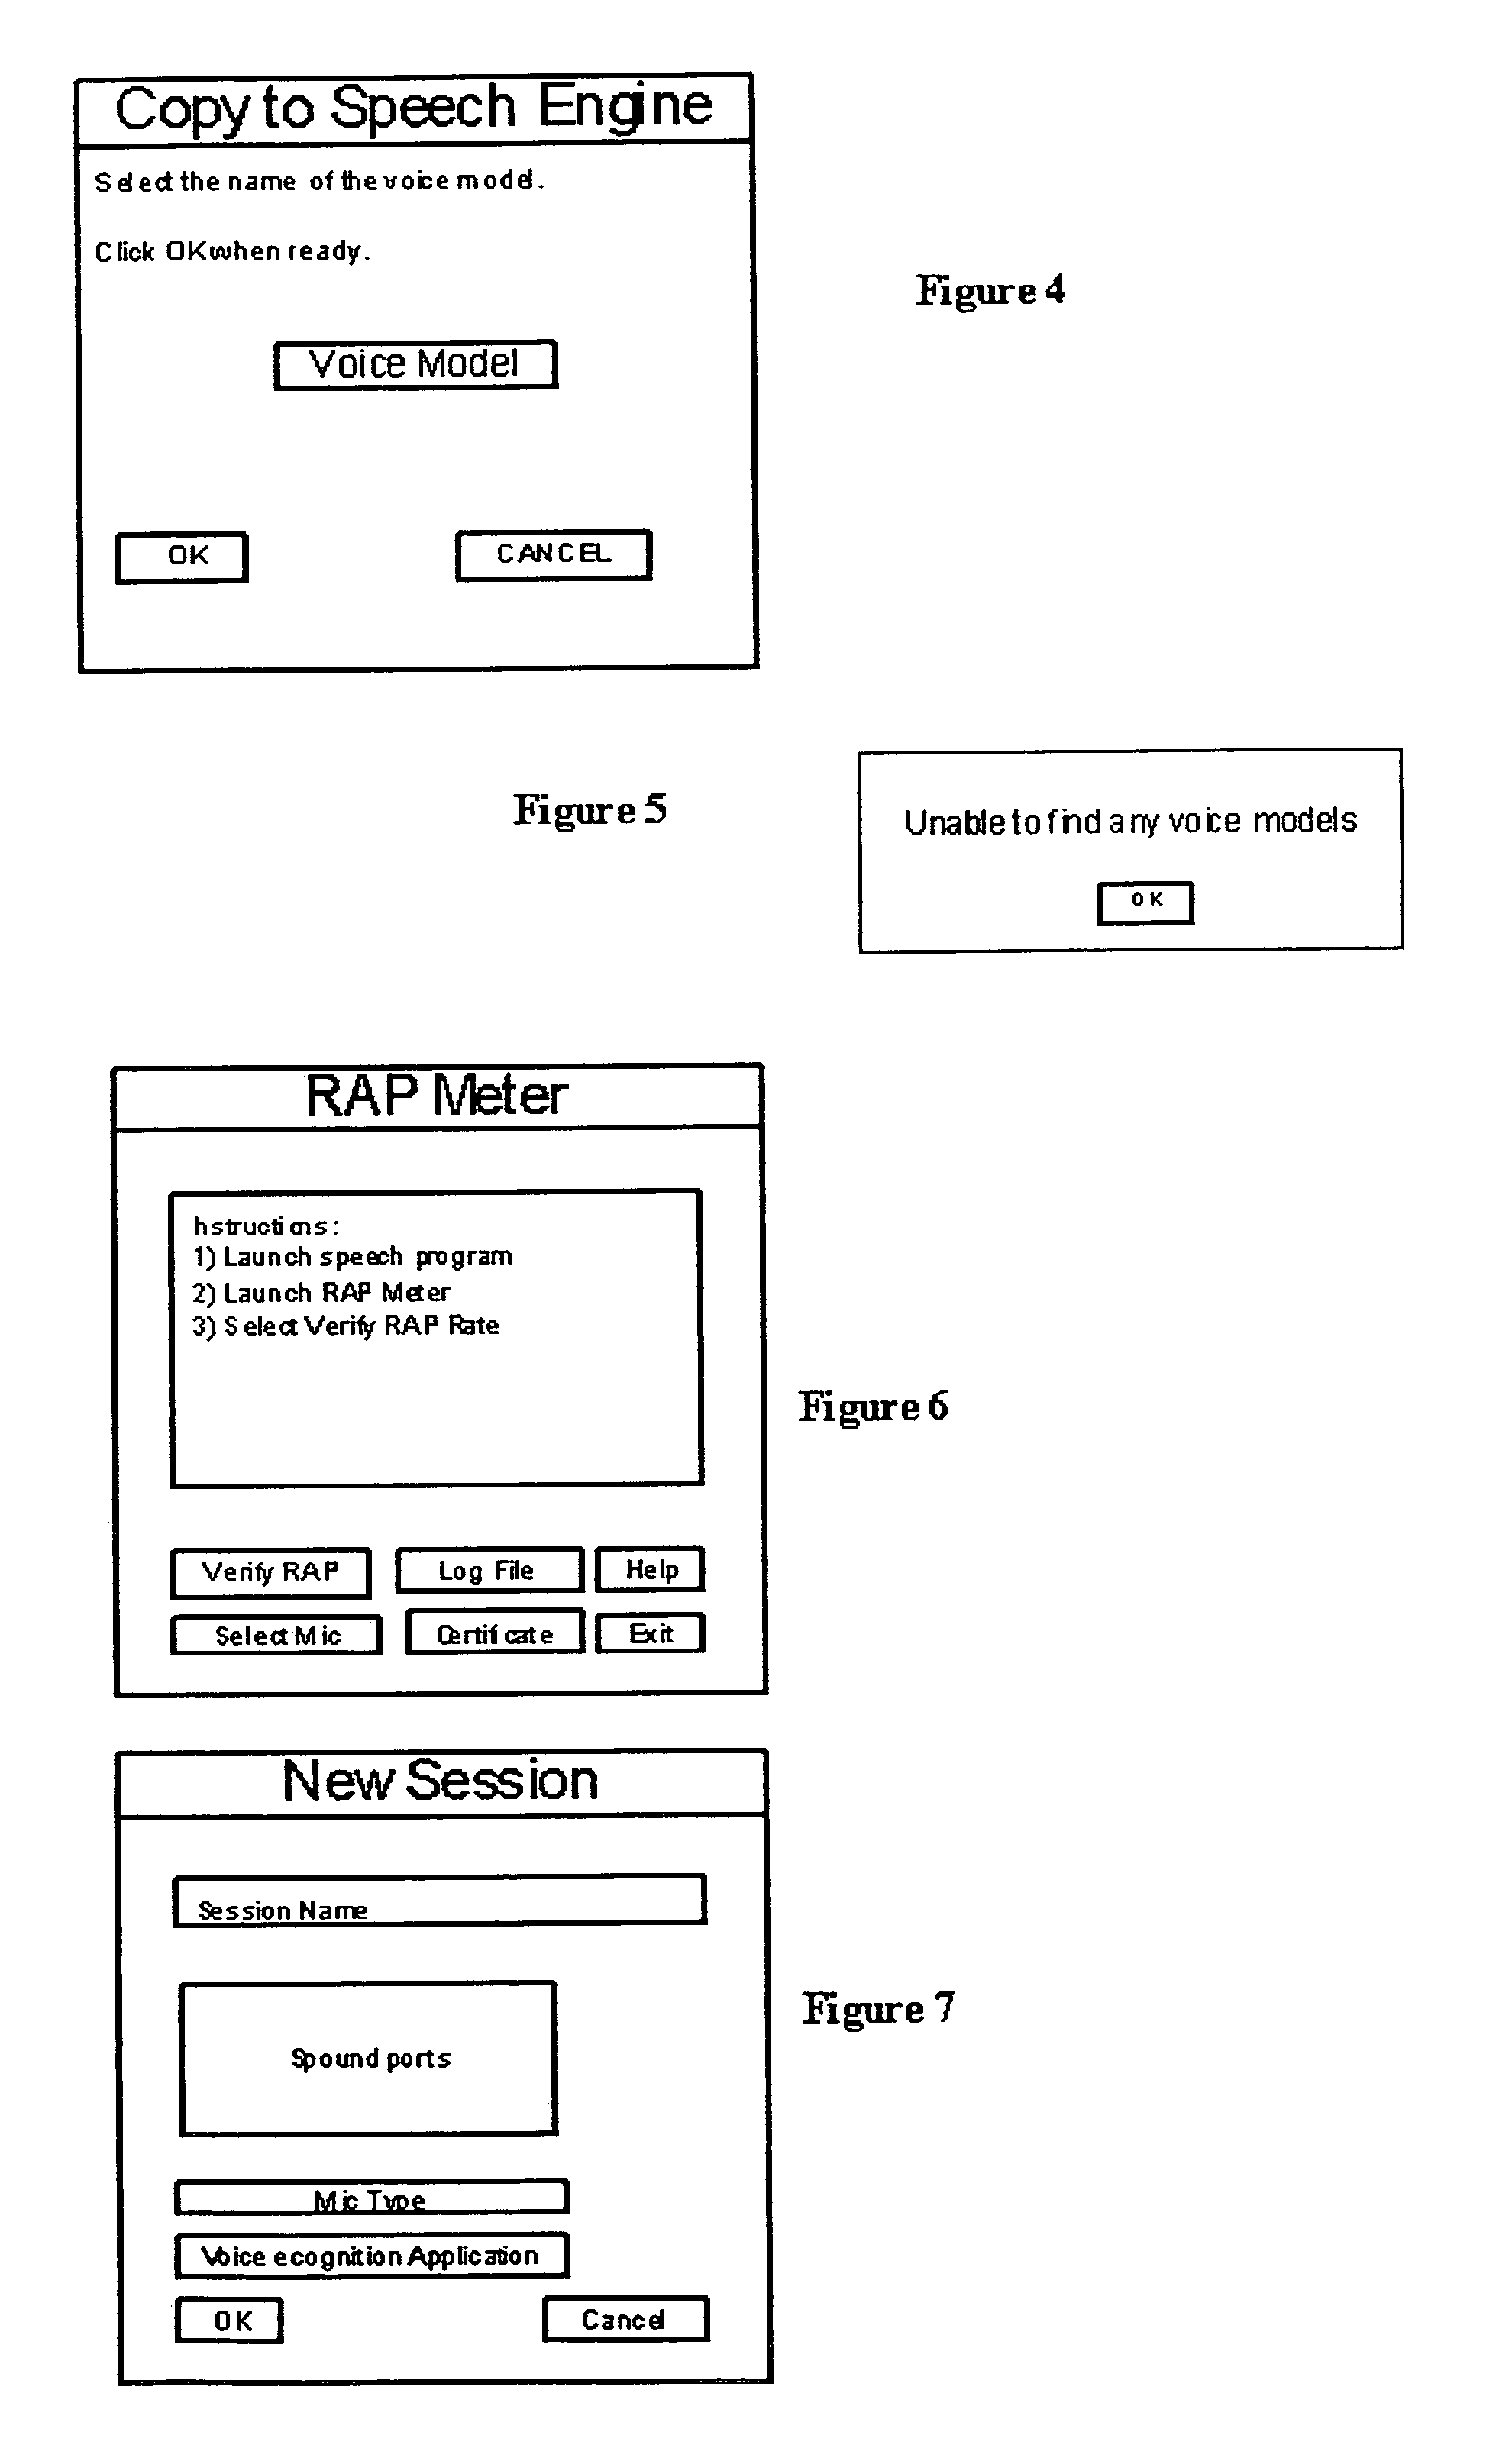 System for transferring personalize matter from one computer to another